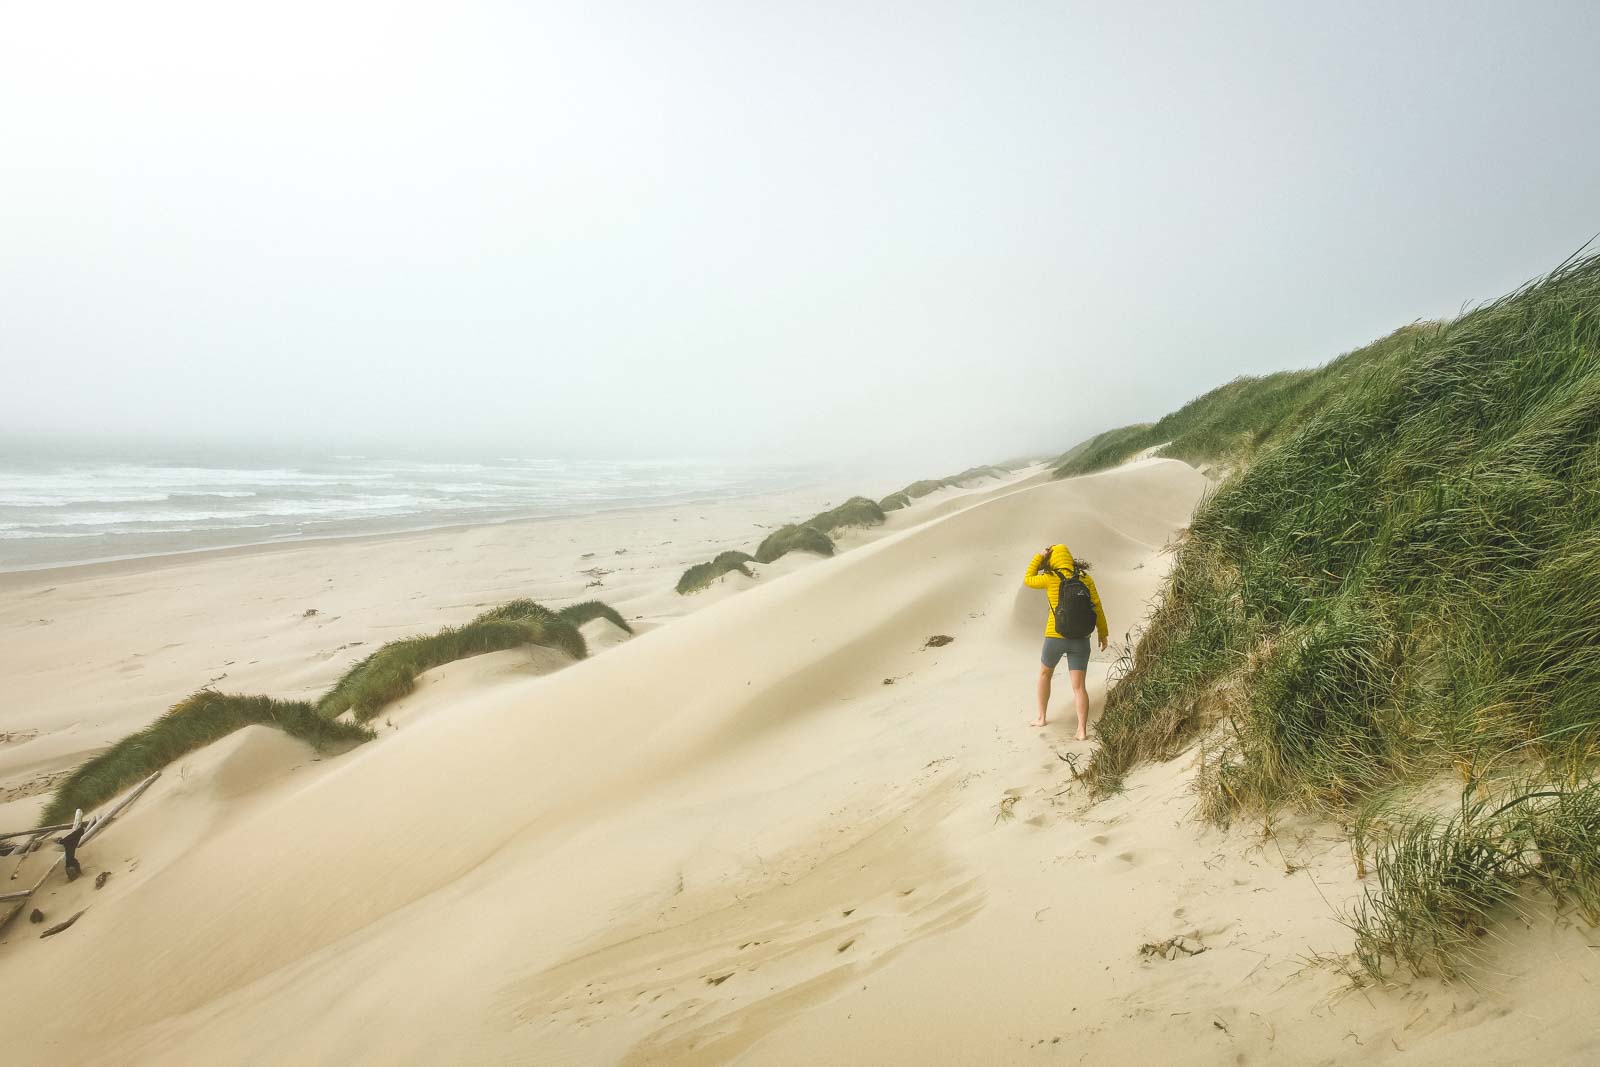 When you're exploring at the Oregon Dunes National Recreation Area, make sure you go to the South Jetty area.